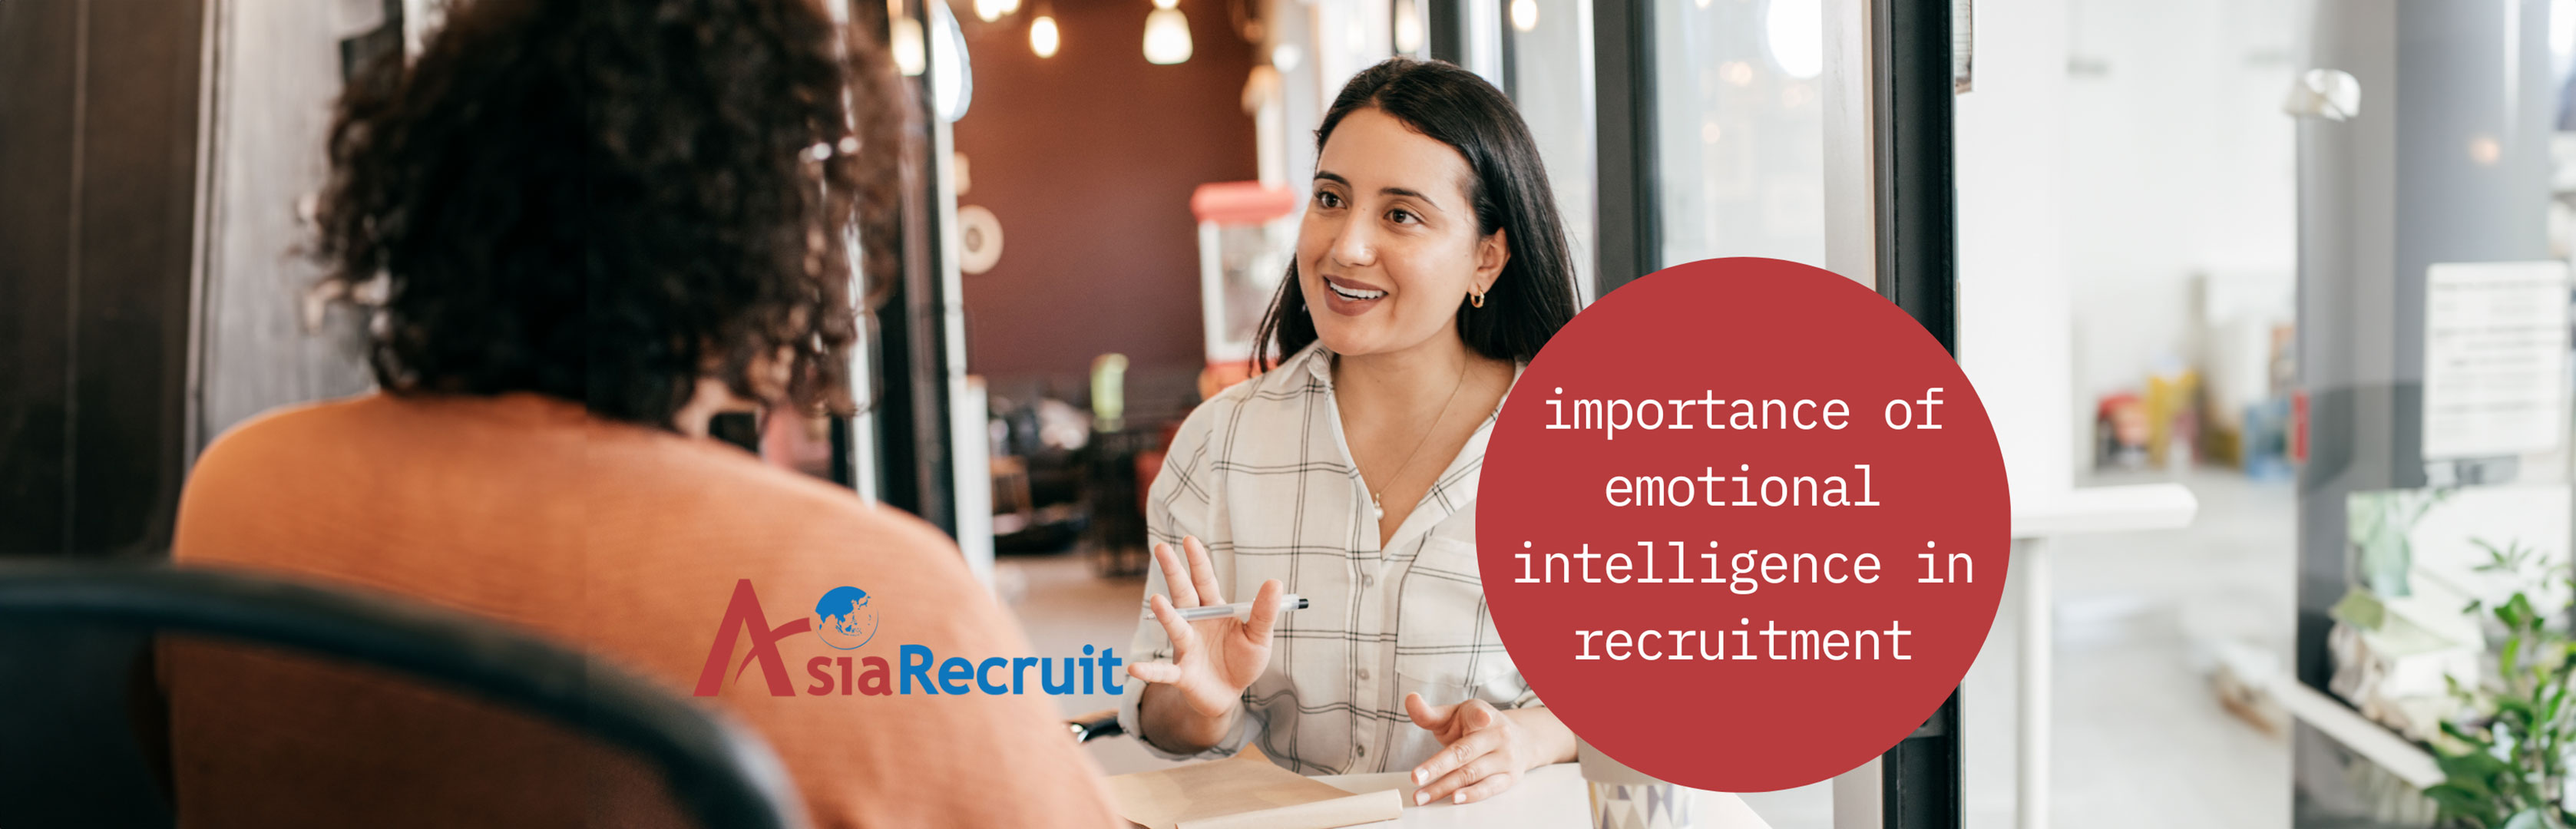 Cultivating a positive recruitment experience: The impact of emotionally intelligent recruiters